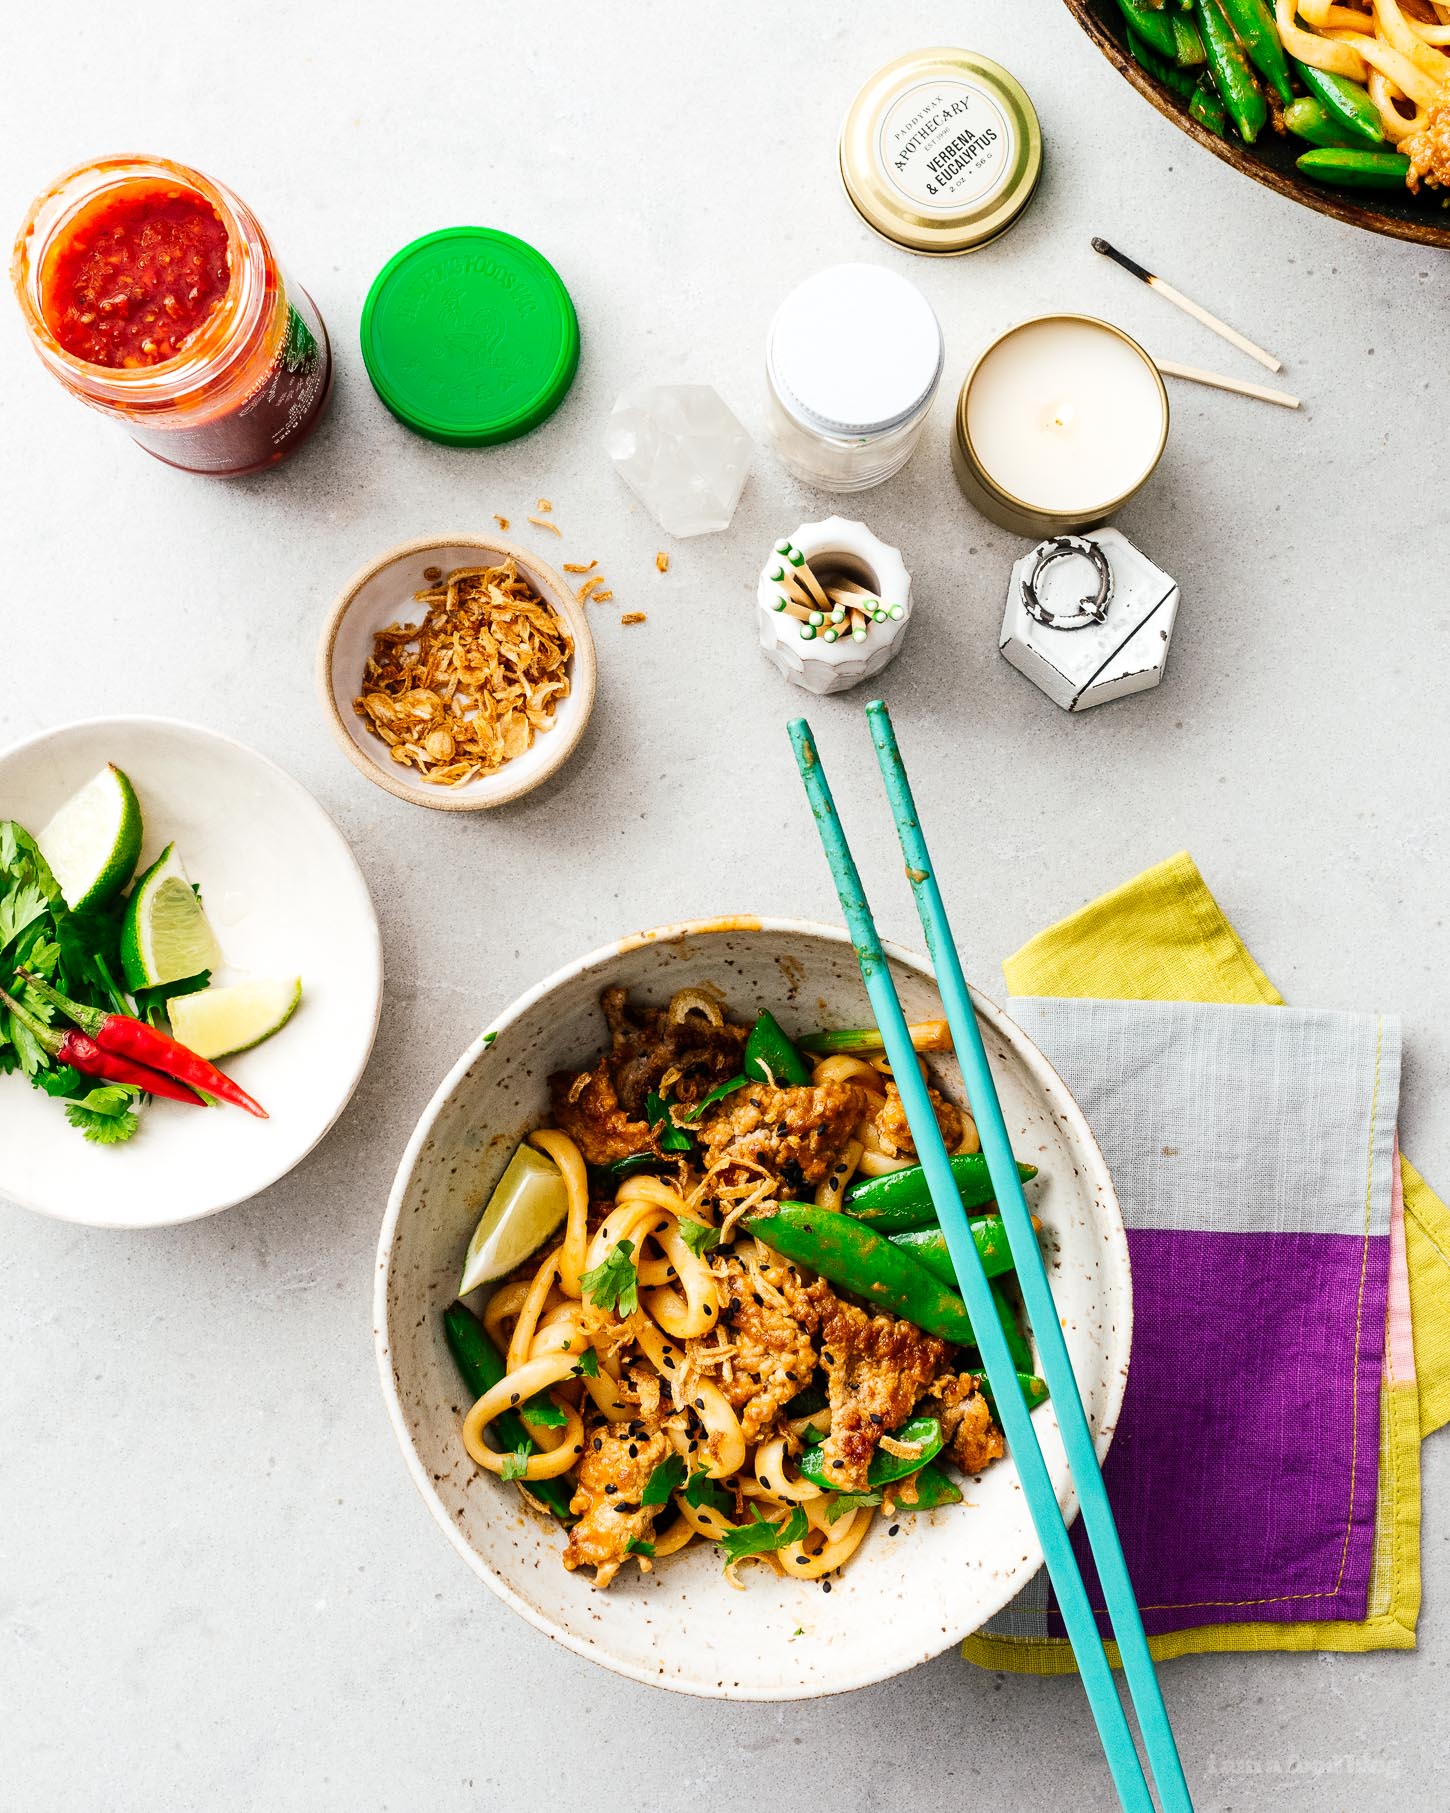 If you’re looking for a quick and easy stir fry that’s full of flavor, look no further! You’re just 15 minutes away from a creamy coconut curry and crispy pork udon stir fry. Minimal chopping, one pan, spicy noodle-y goodness. #stirfry #recipes #dinner #thaifood #thaicurry #weeknight